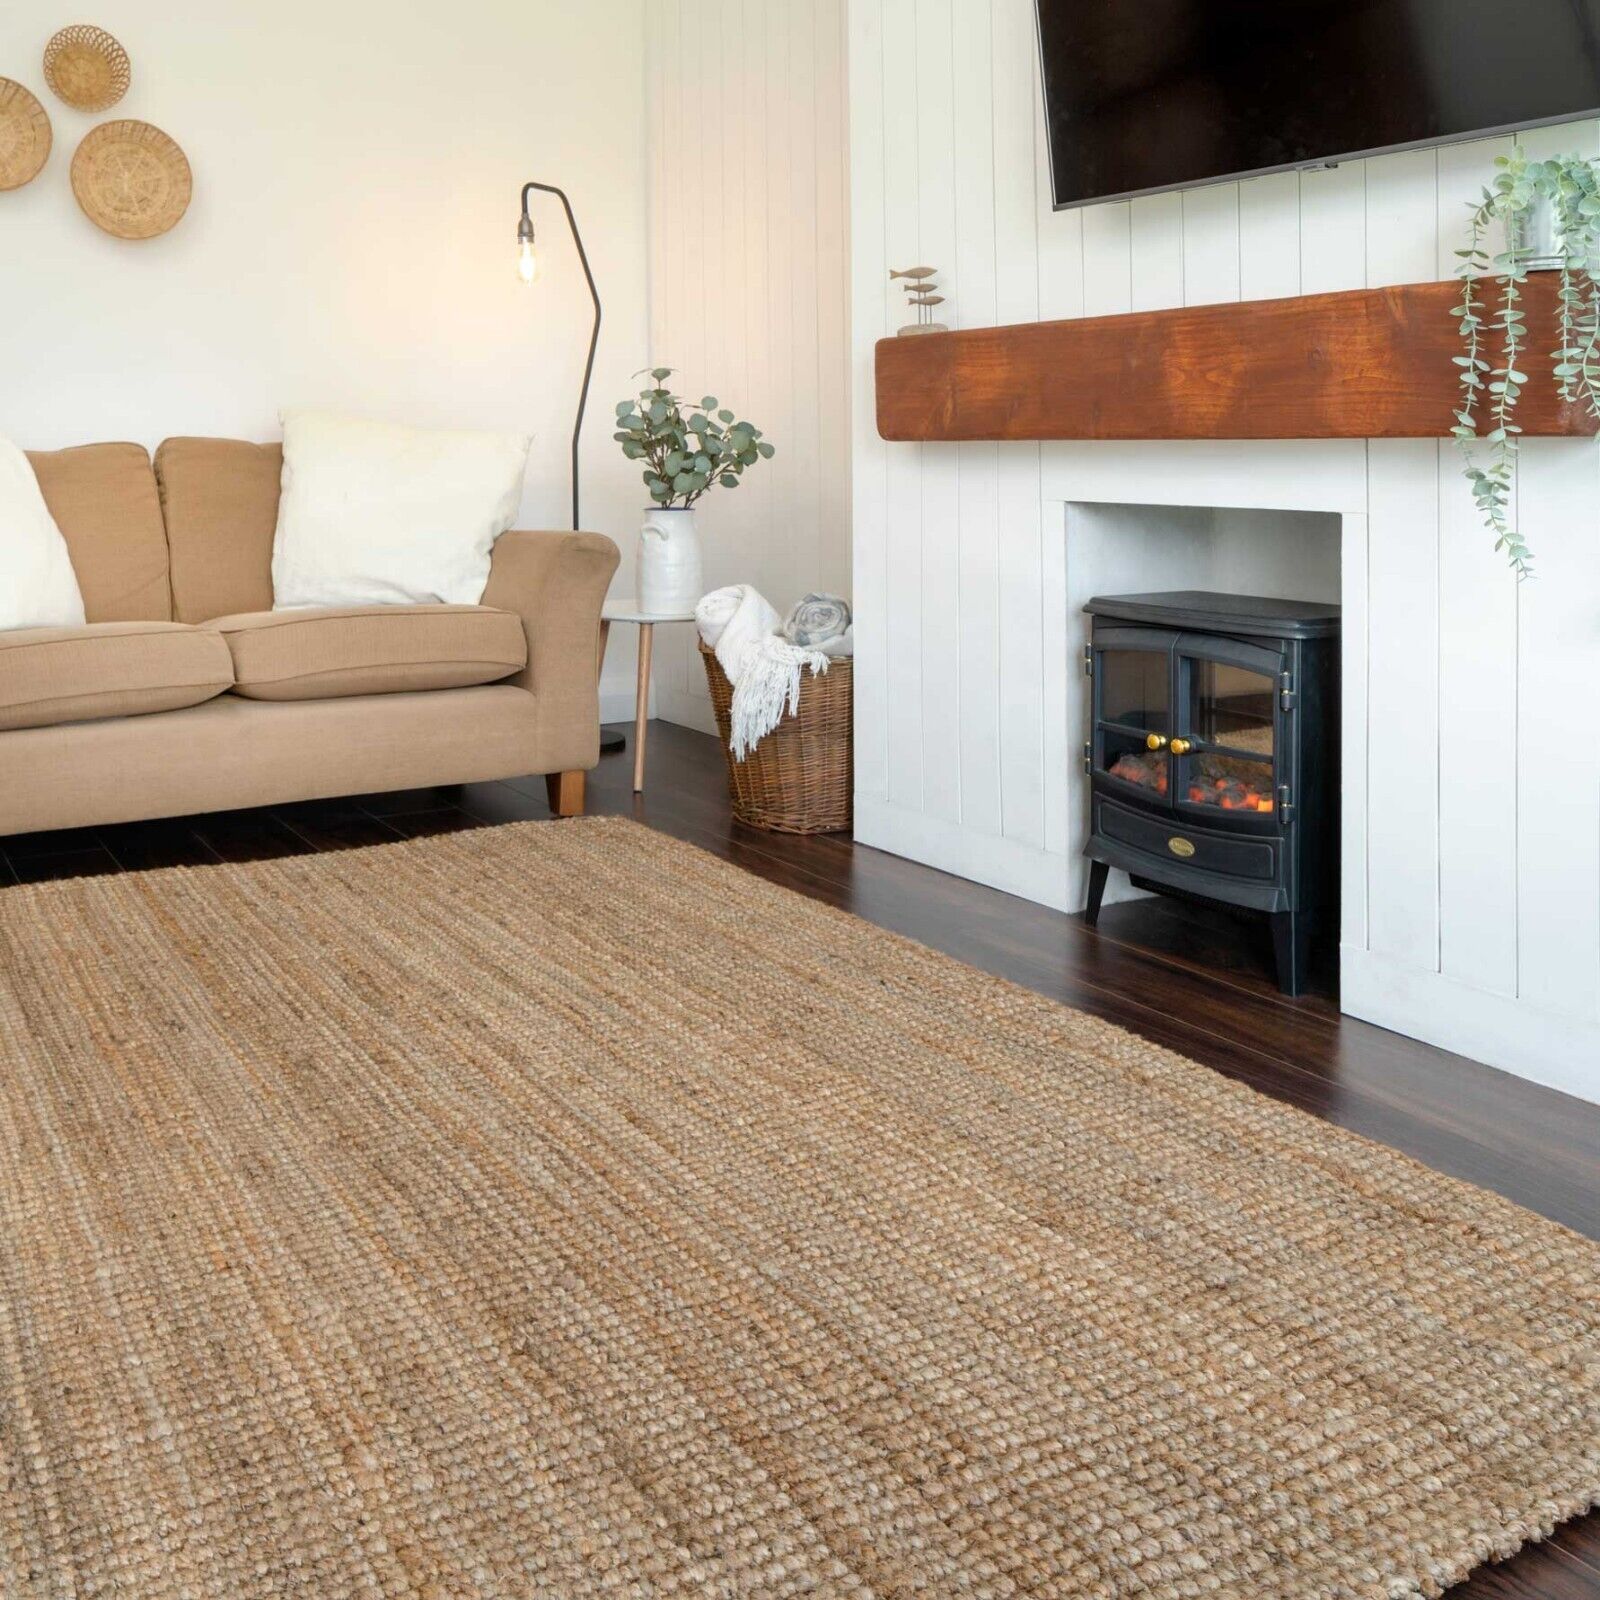 Boucle Jute Natural Jute Rug For Living Room Large Small Sizes High Quality  Mat | Ebay Within Jute Rugs (View 10 of 15)